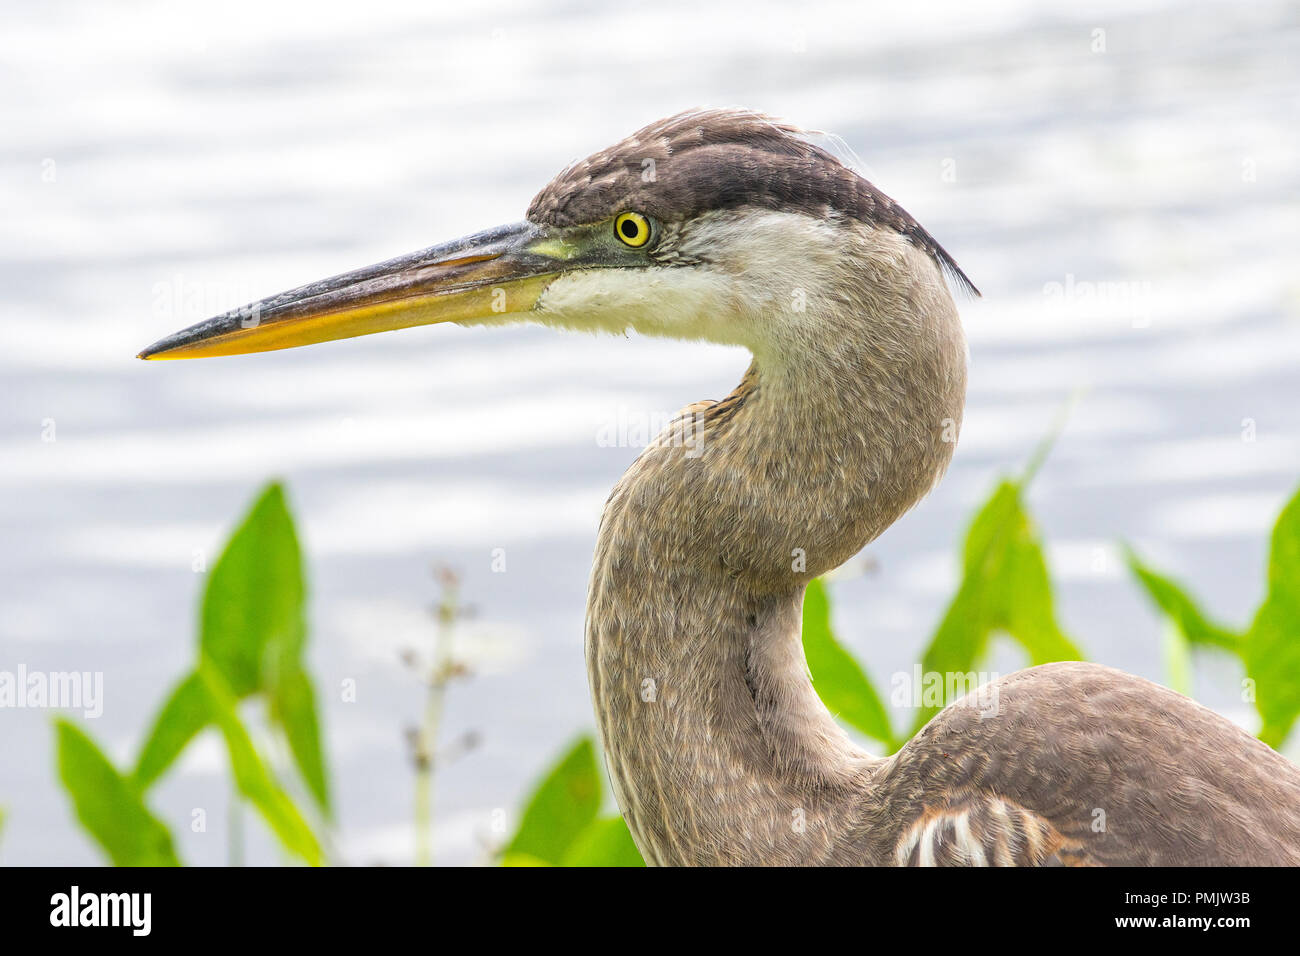 Portrait of a Great Blue Heron (Ardea herodias) in front of water. Stock Photo